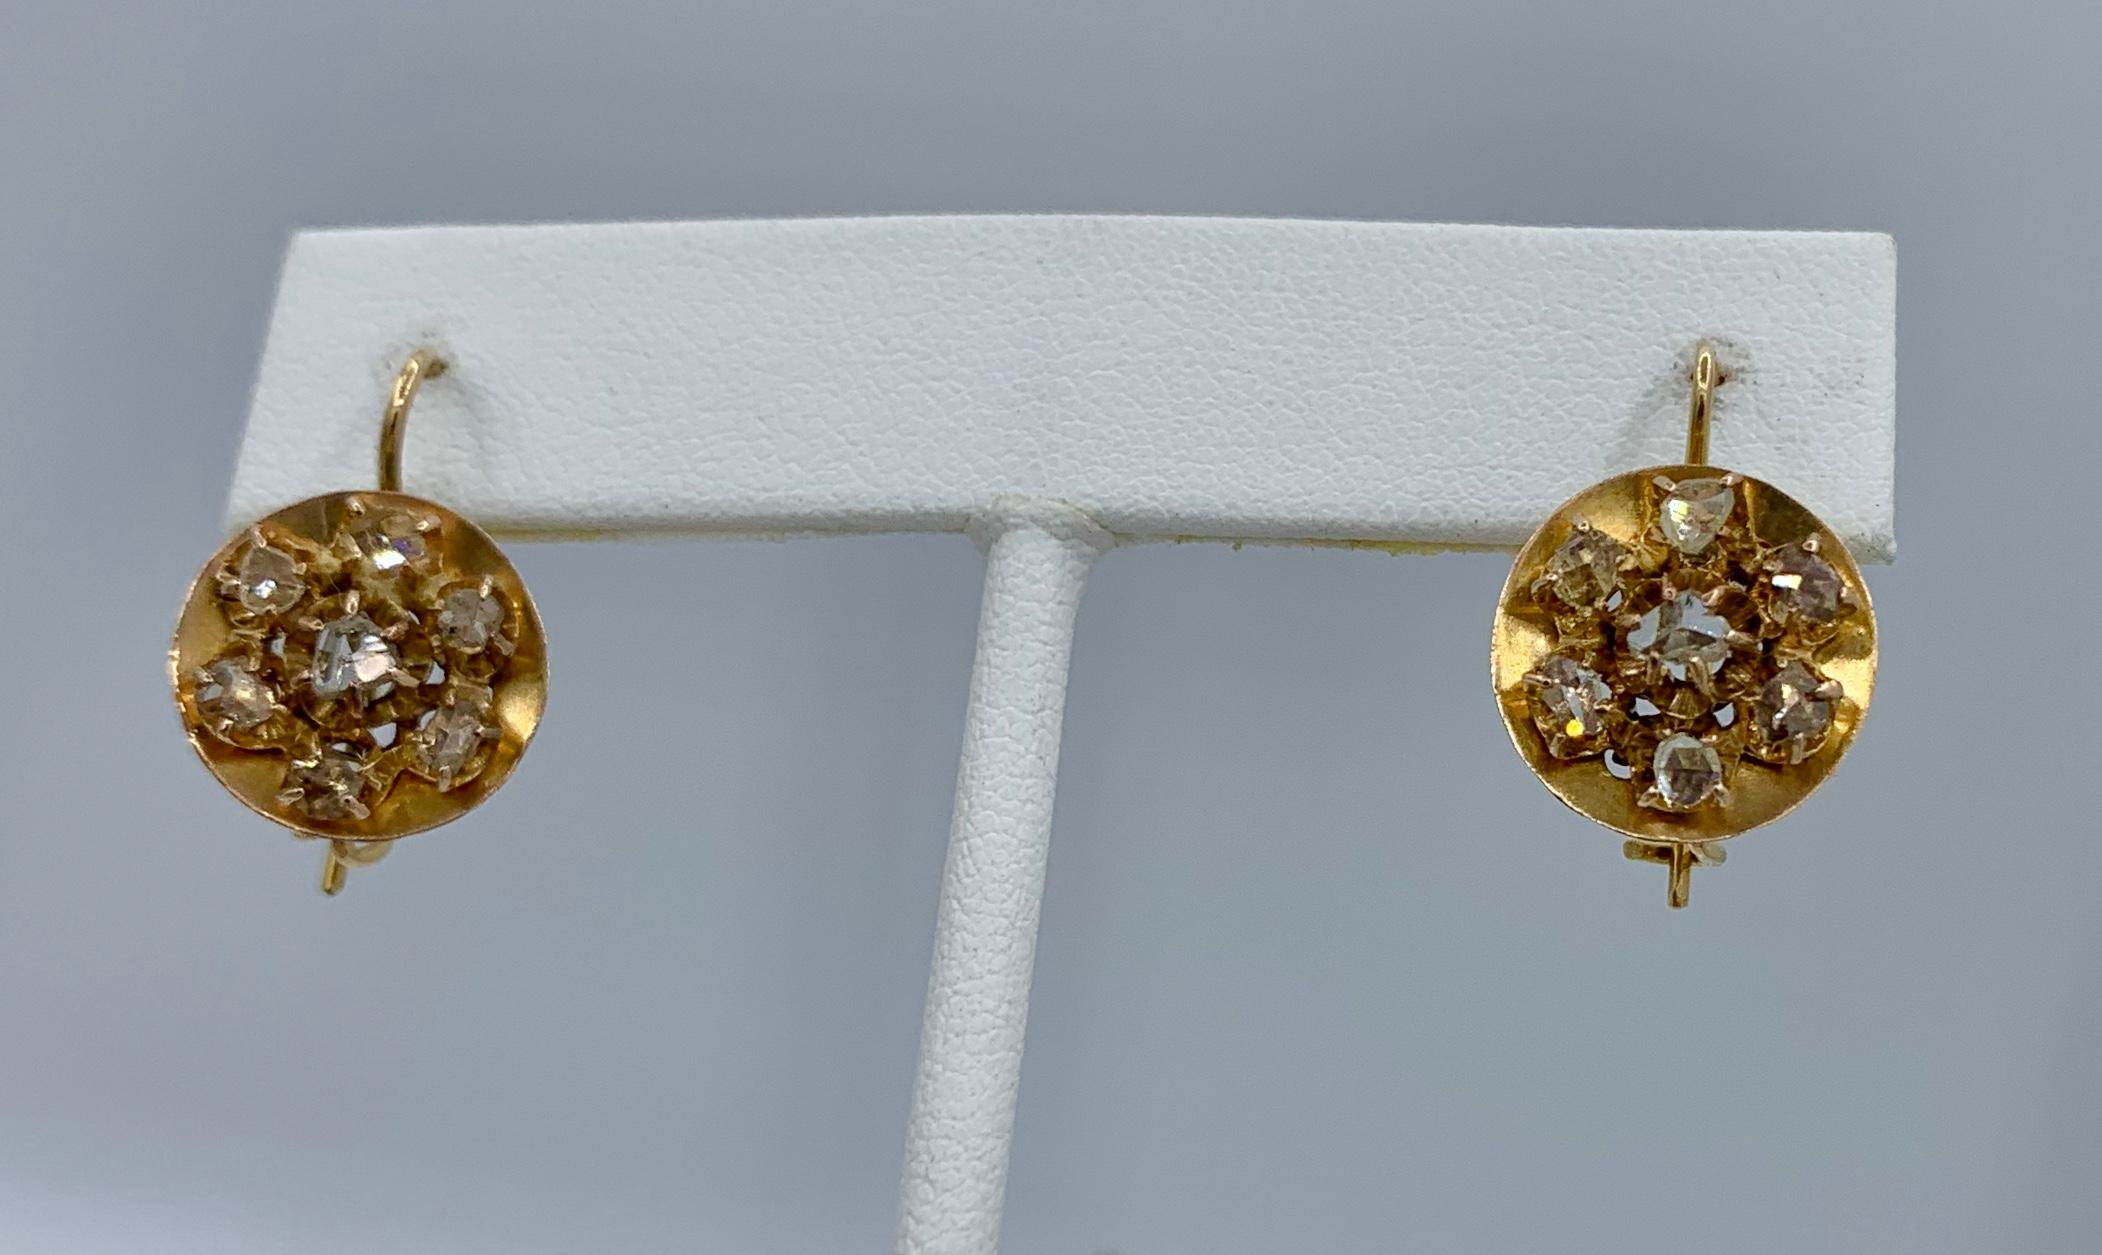 This is rare pair of antique Rose Cut Diamond Dangle Drop Diamond Cluster Earrings in 14 Karat Gold.  They have extraordinary design with a central diamond surrounded by six additional Rose Cut Diamonds all individually prong set. 
The earrings have